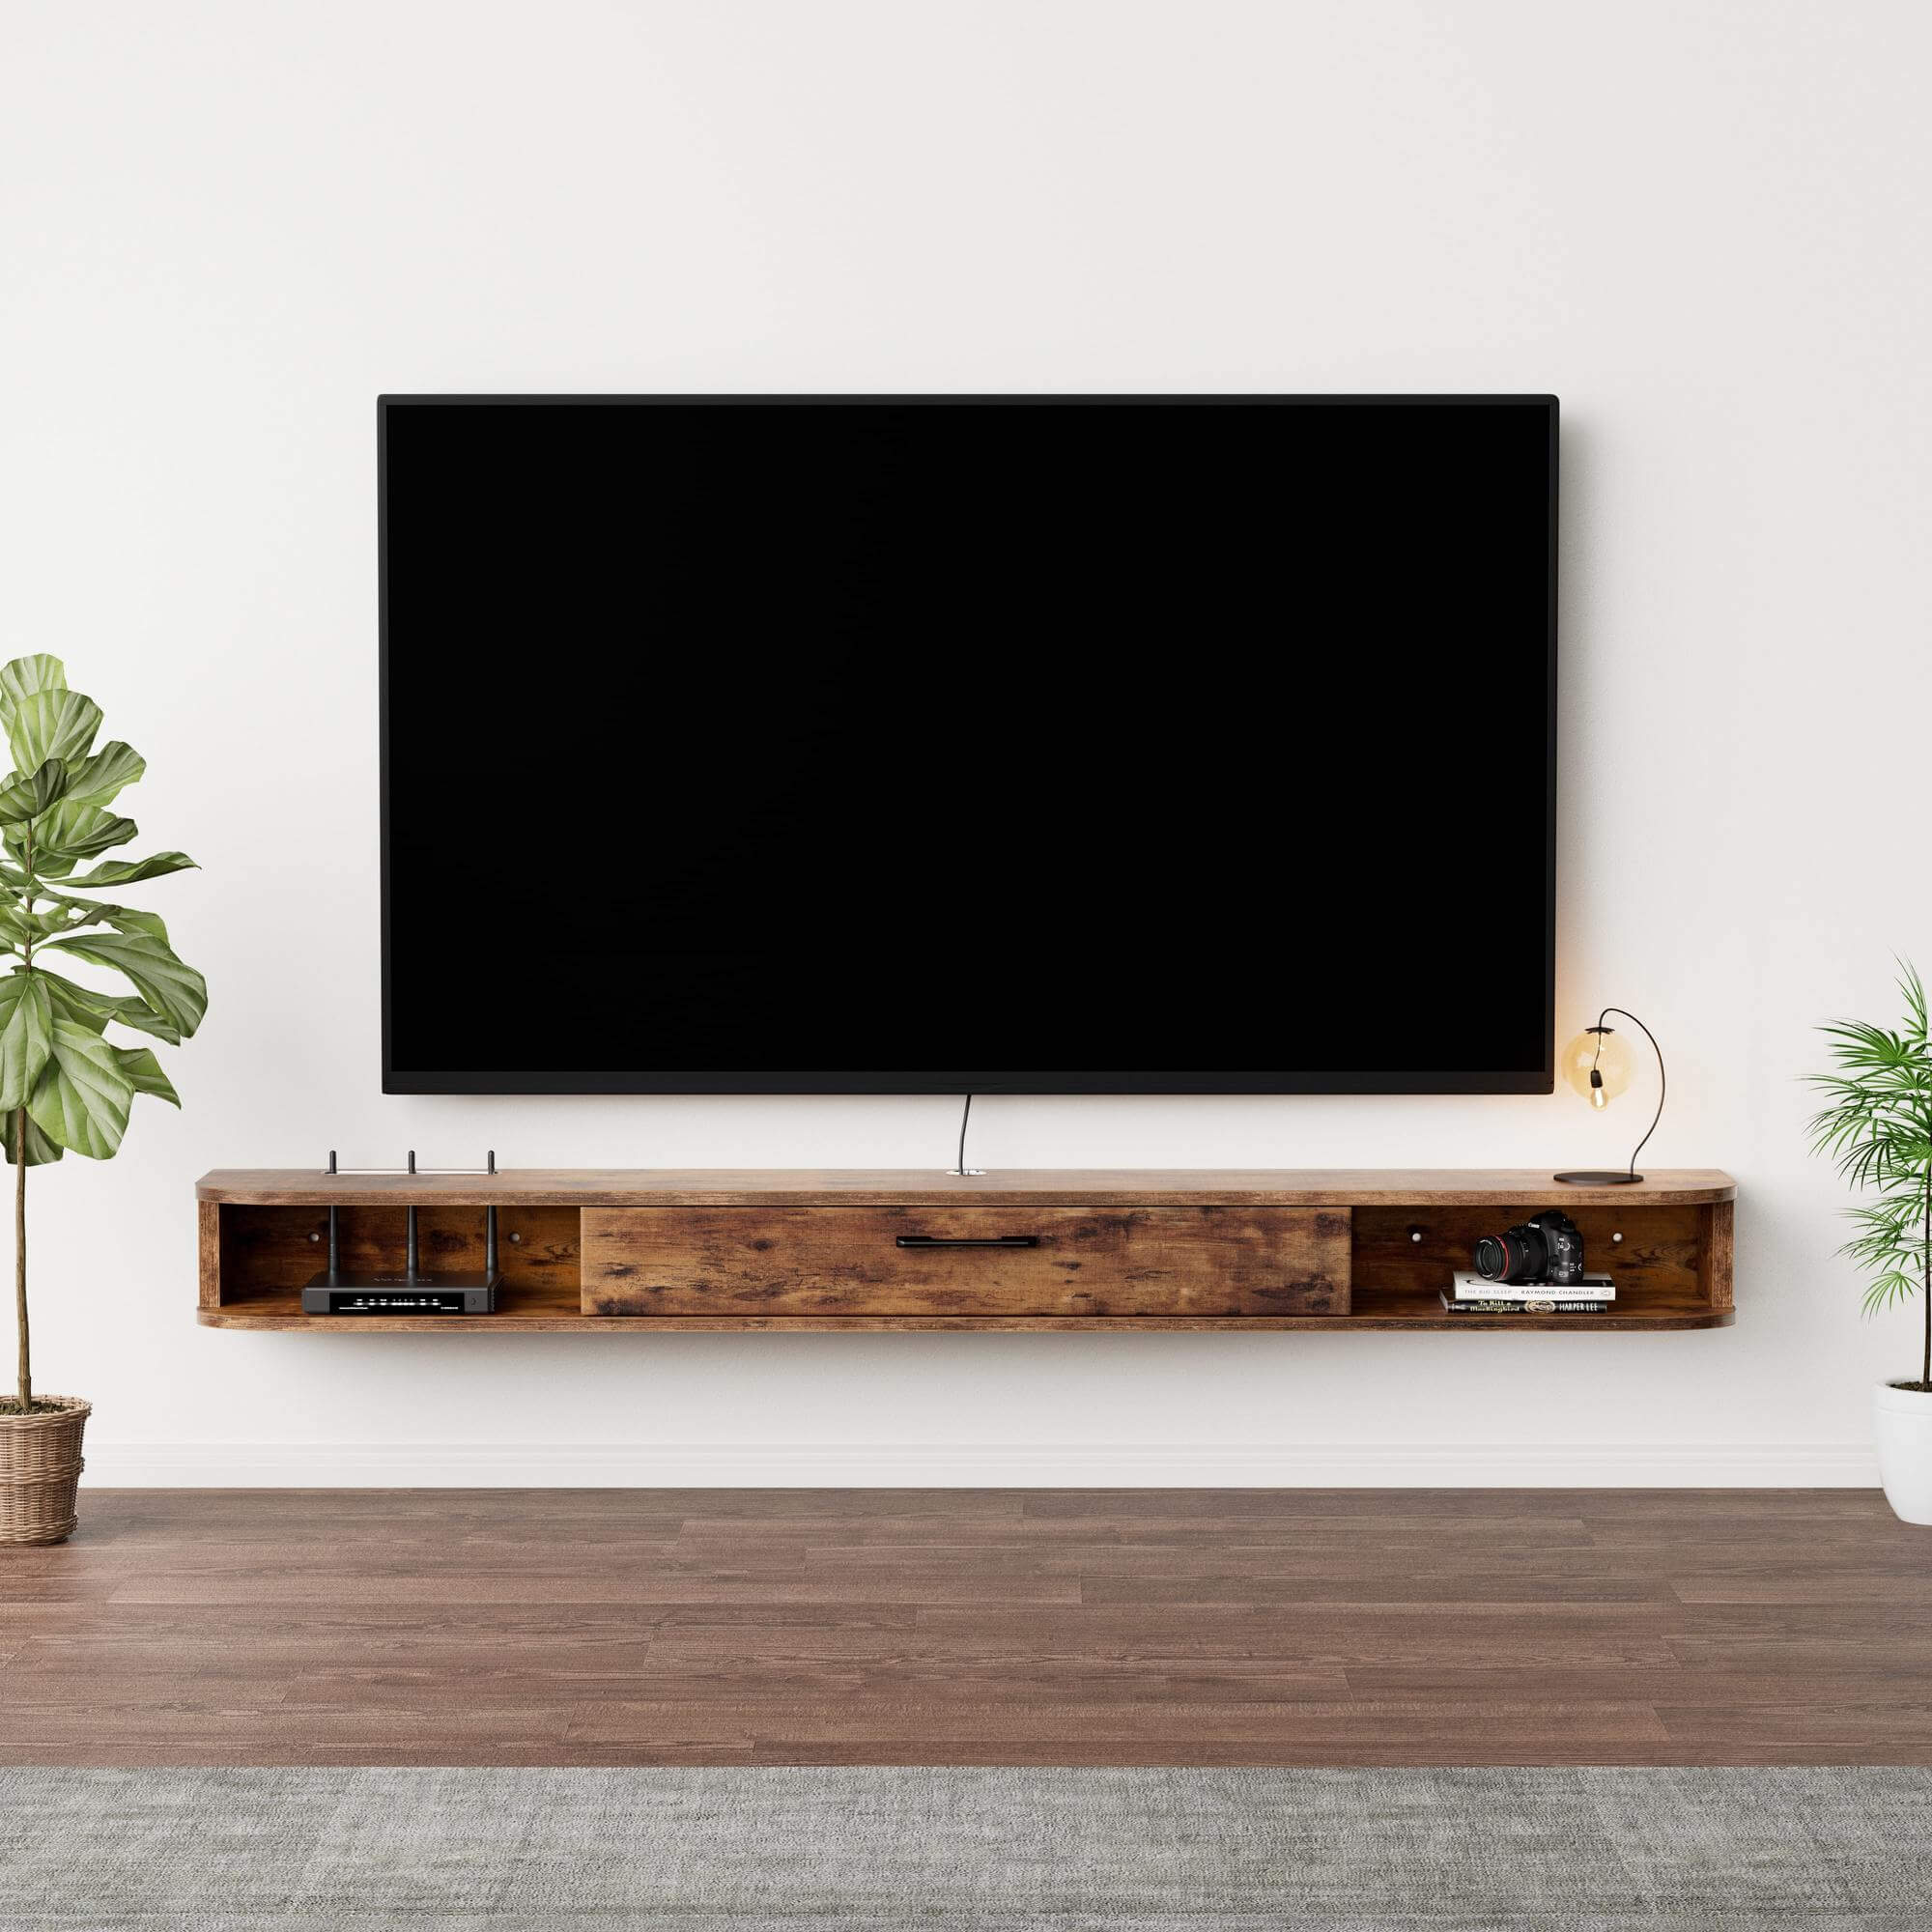 70.86" Rustic Brown Slim Floating TV Stand Wall Shelf Up to 80" TVs